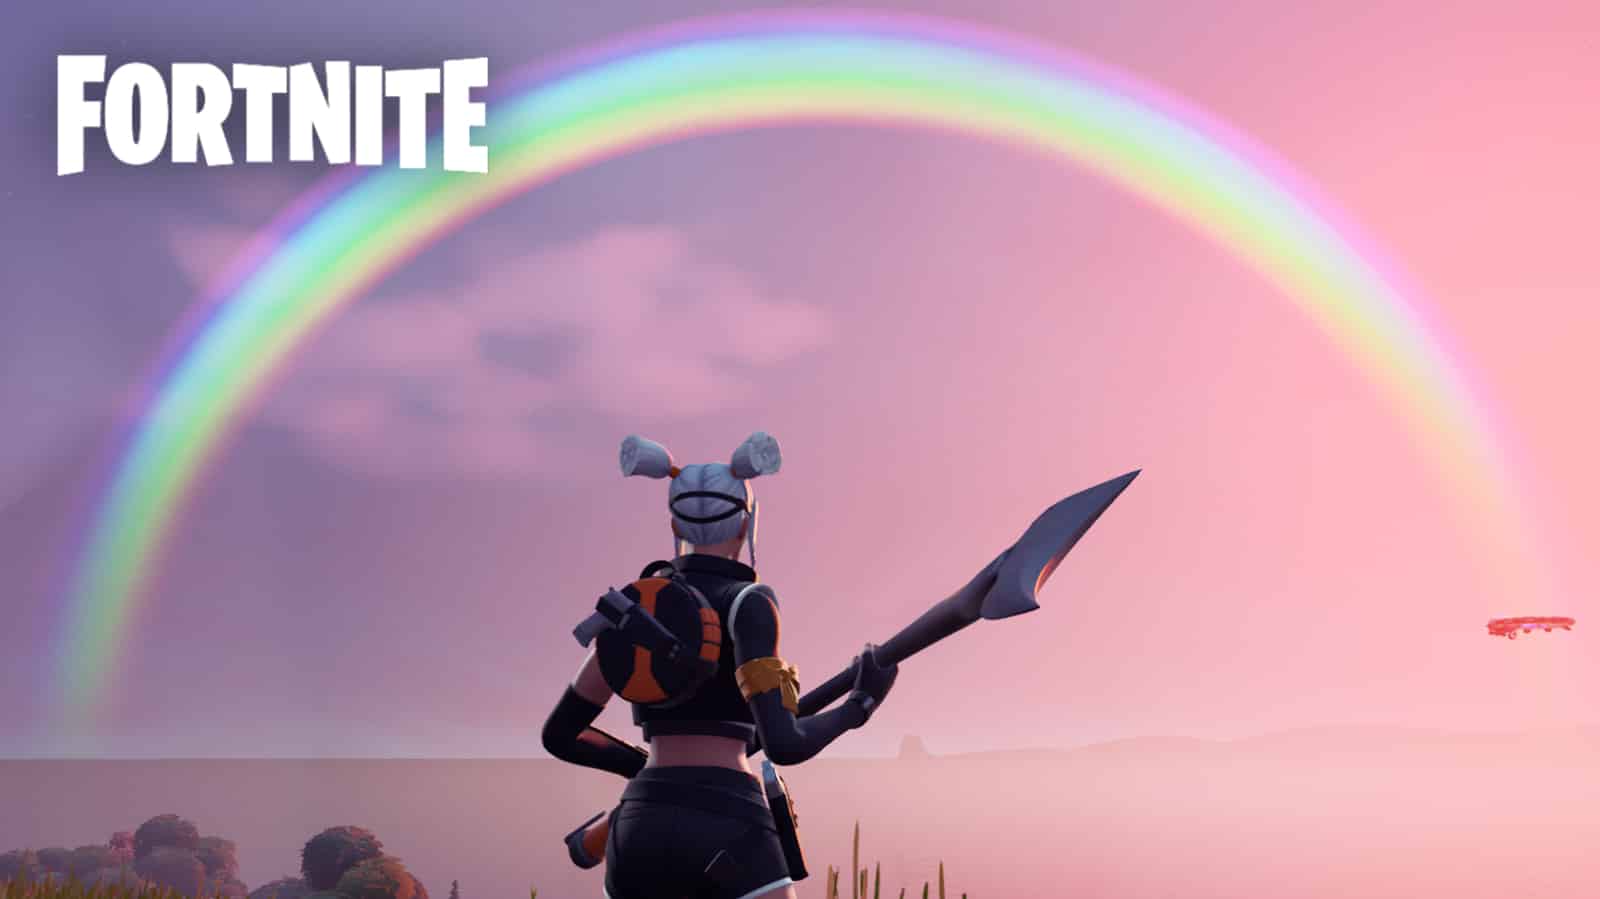 Fortnite's Rainbow Royale Comes With Free Cosmetics, Rewards, and More